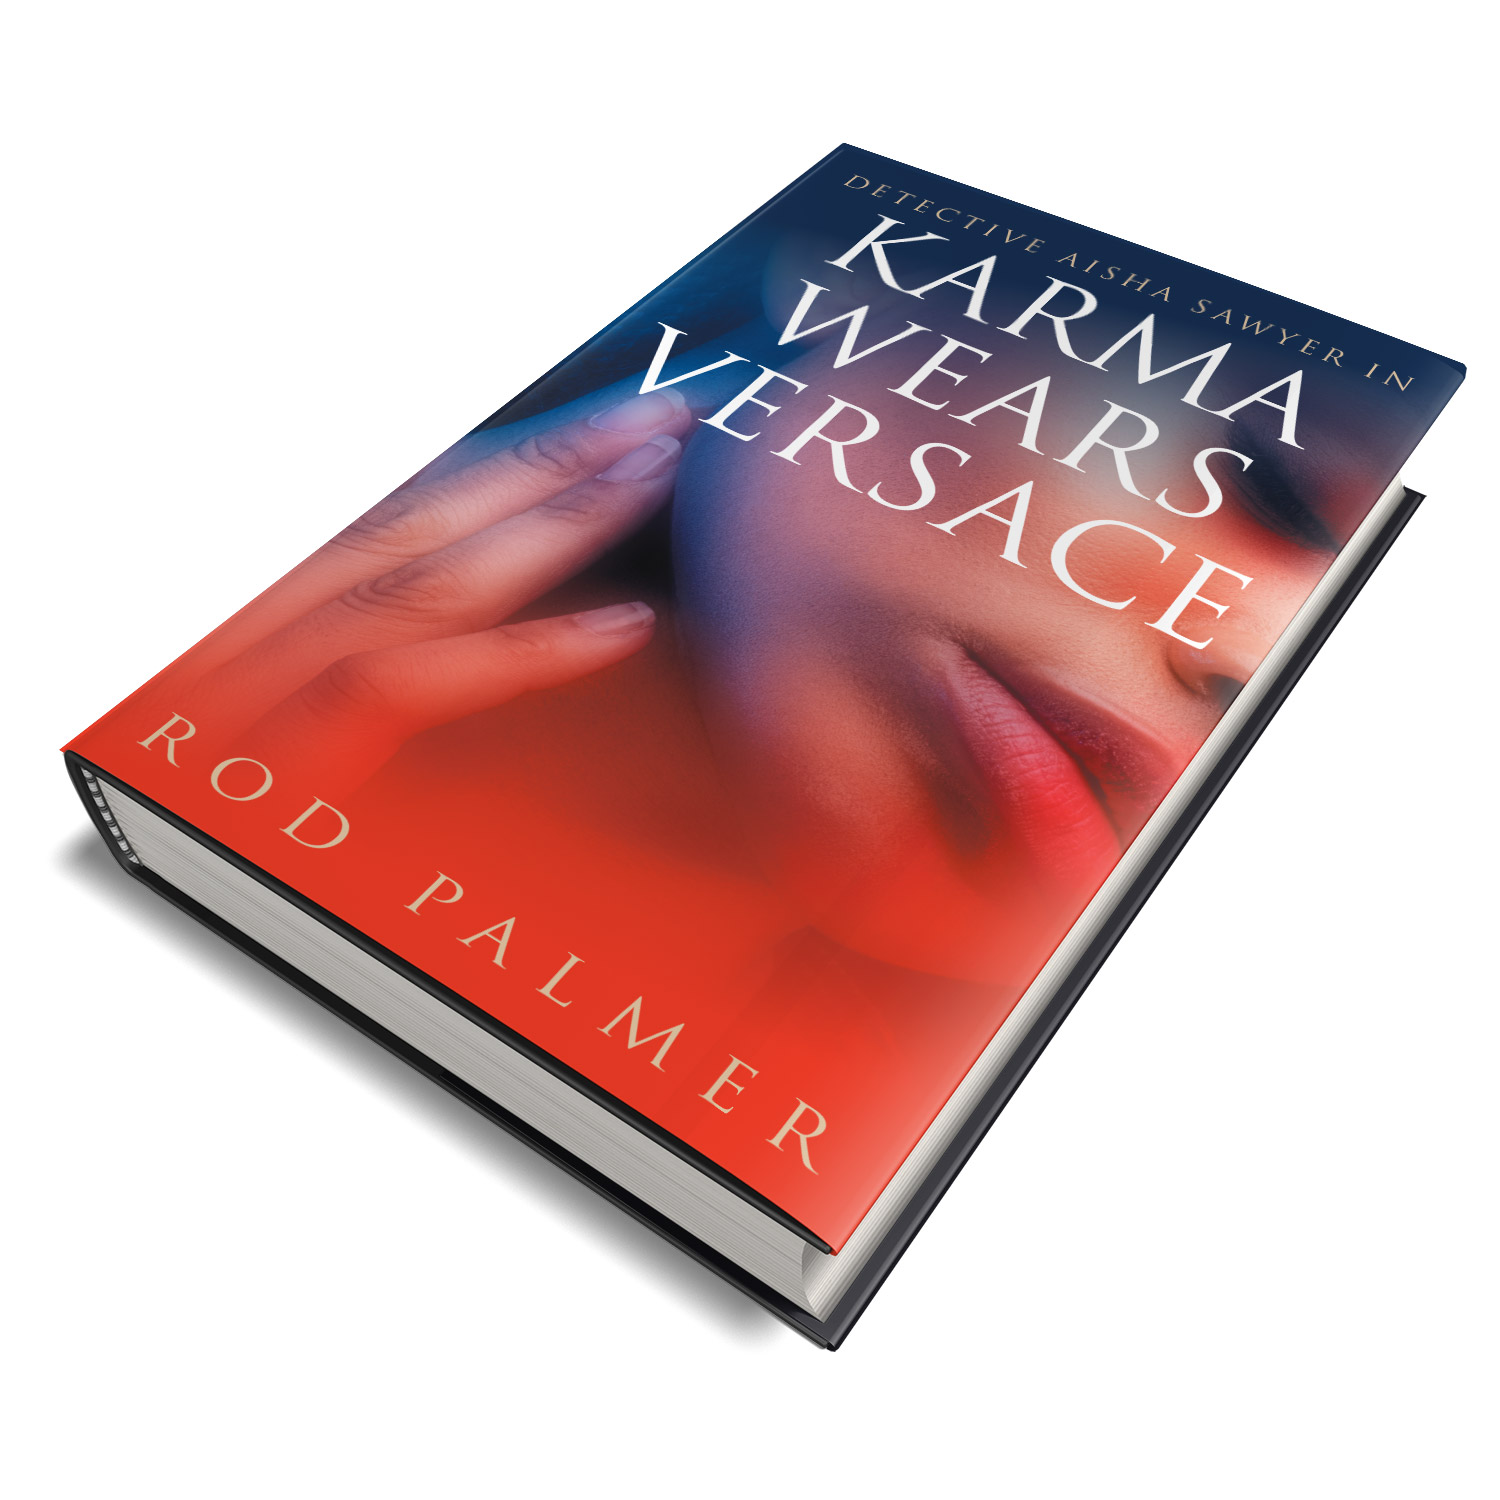 'Karma Wears Versace' is a steamy, female-led detective thriller, set in Atlanta. The author is Rod Palmer. The book cover design and interior formatting are by Mark Thomas. To learn more about what Mark could do for your book, please visit coverness.com.